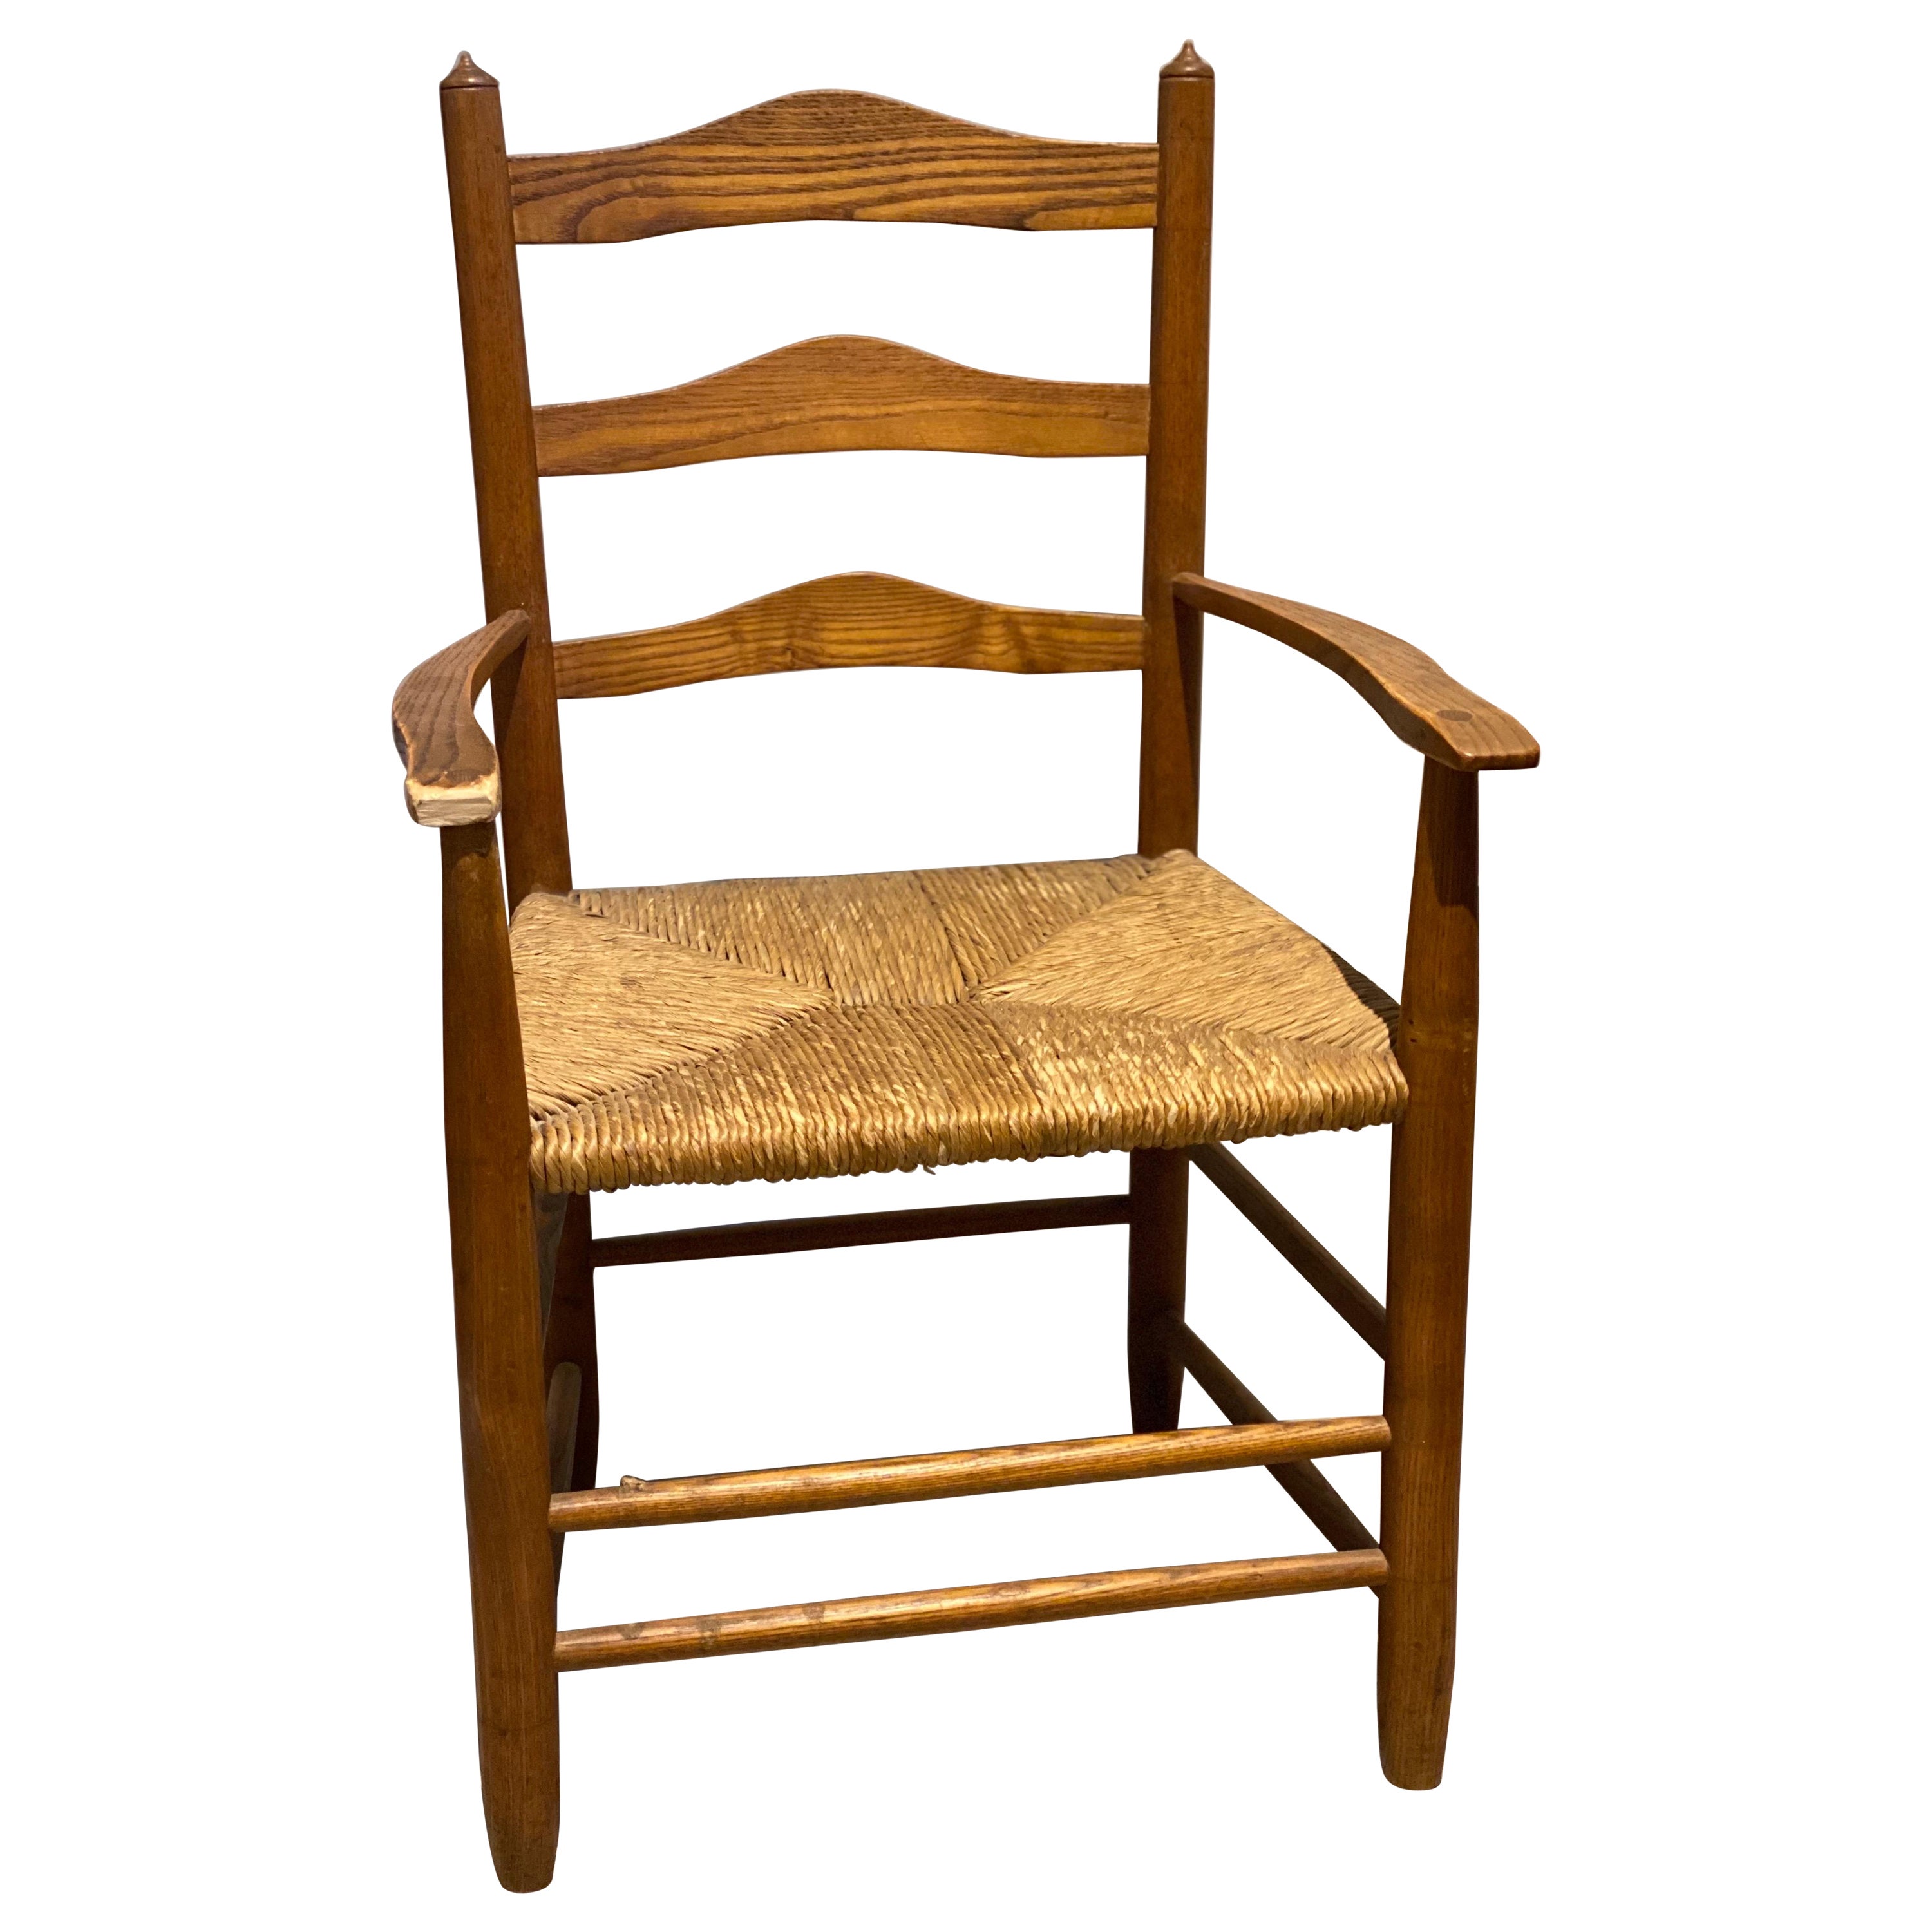 A Child's Wooden Chair with Handwoven Rush Seat, American